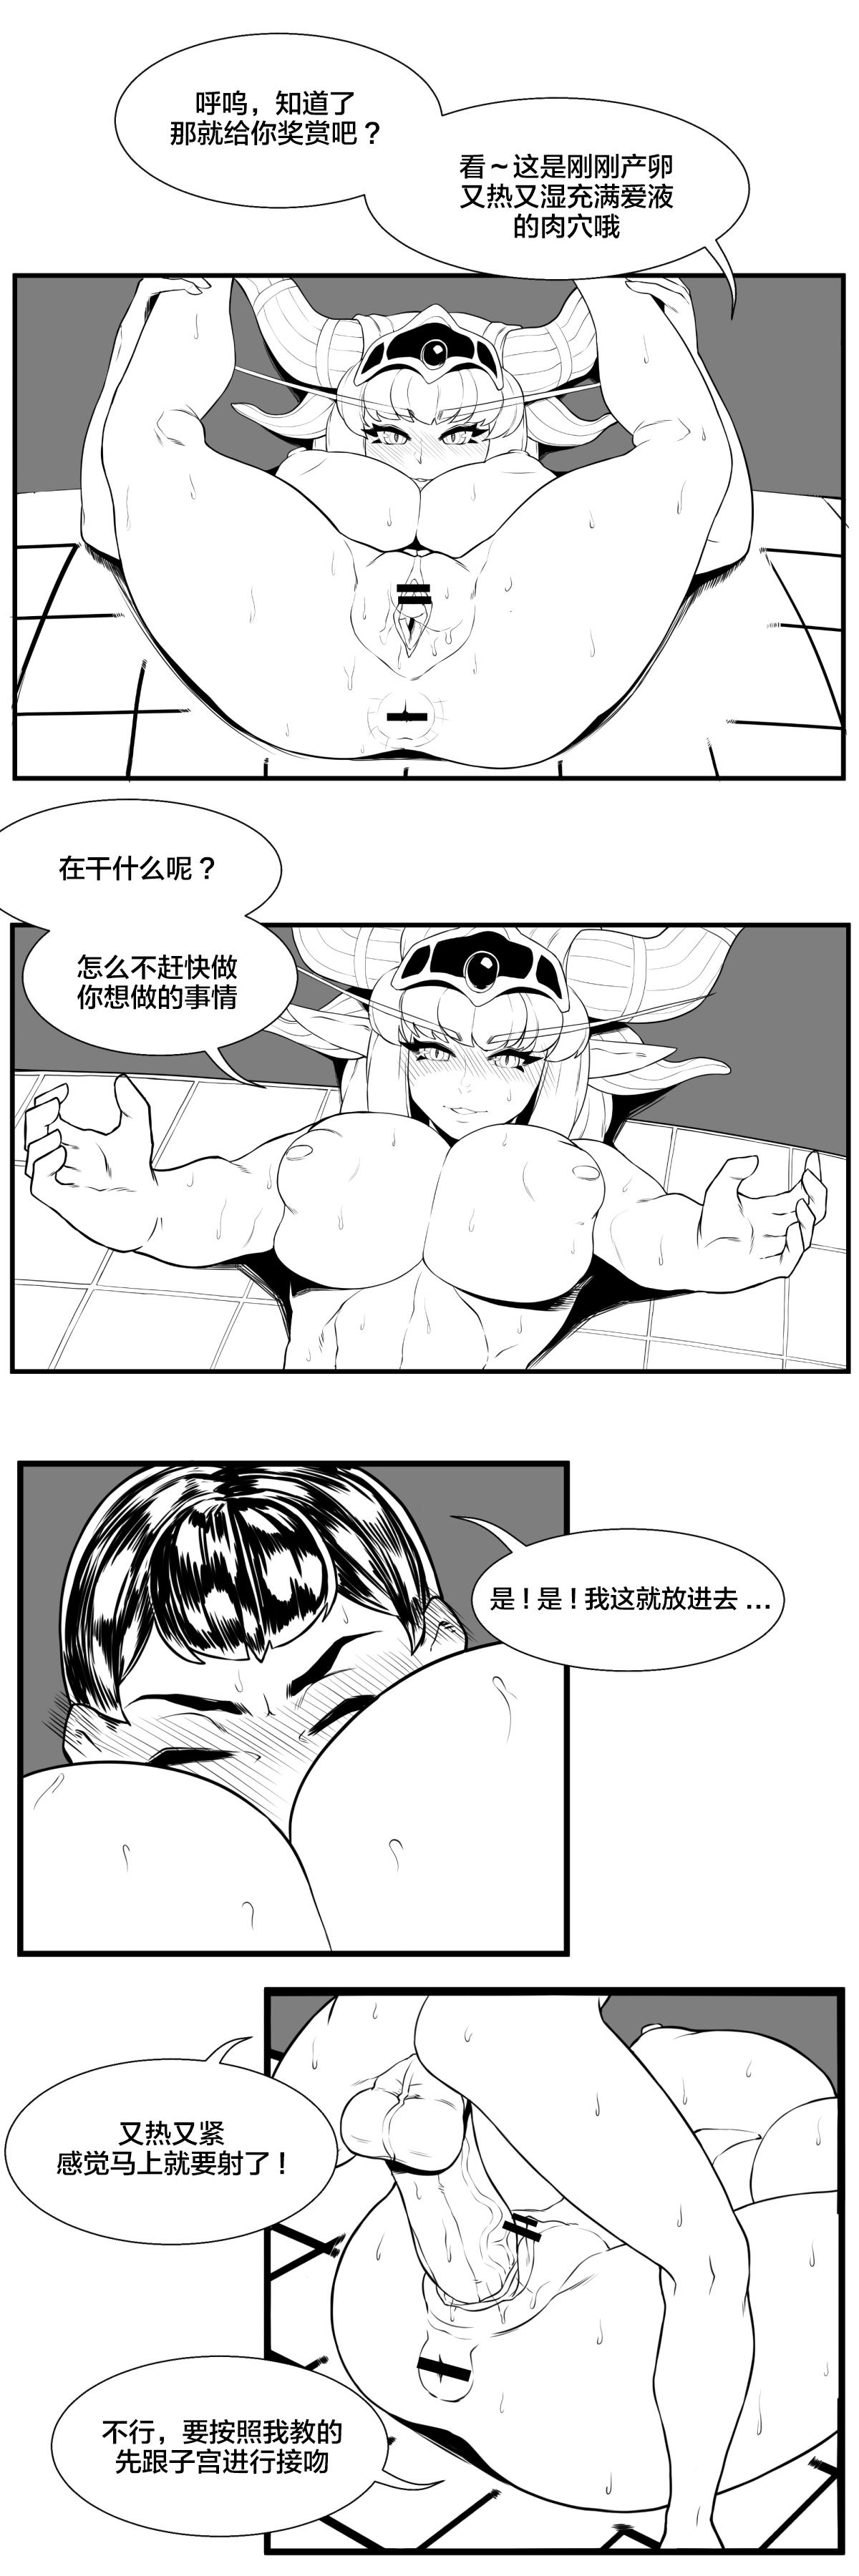 Style 용엄마와 비밀상담 - World of warcraft Juicy - Page 6